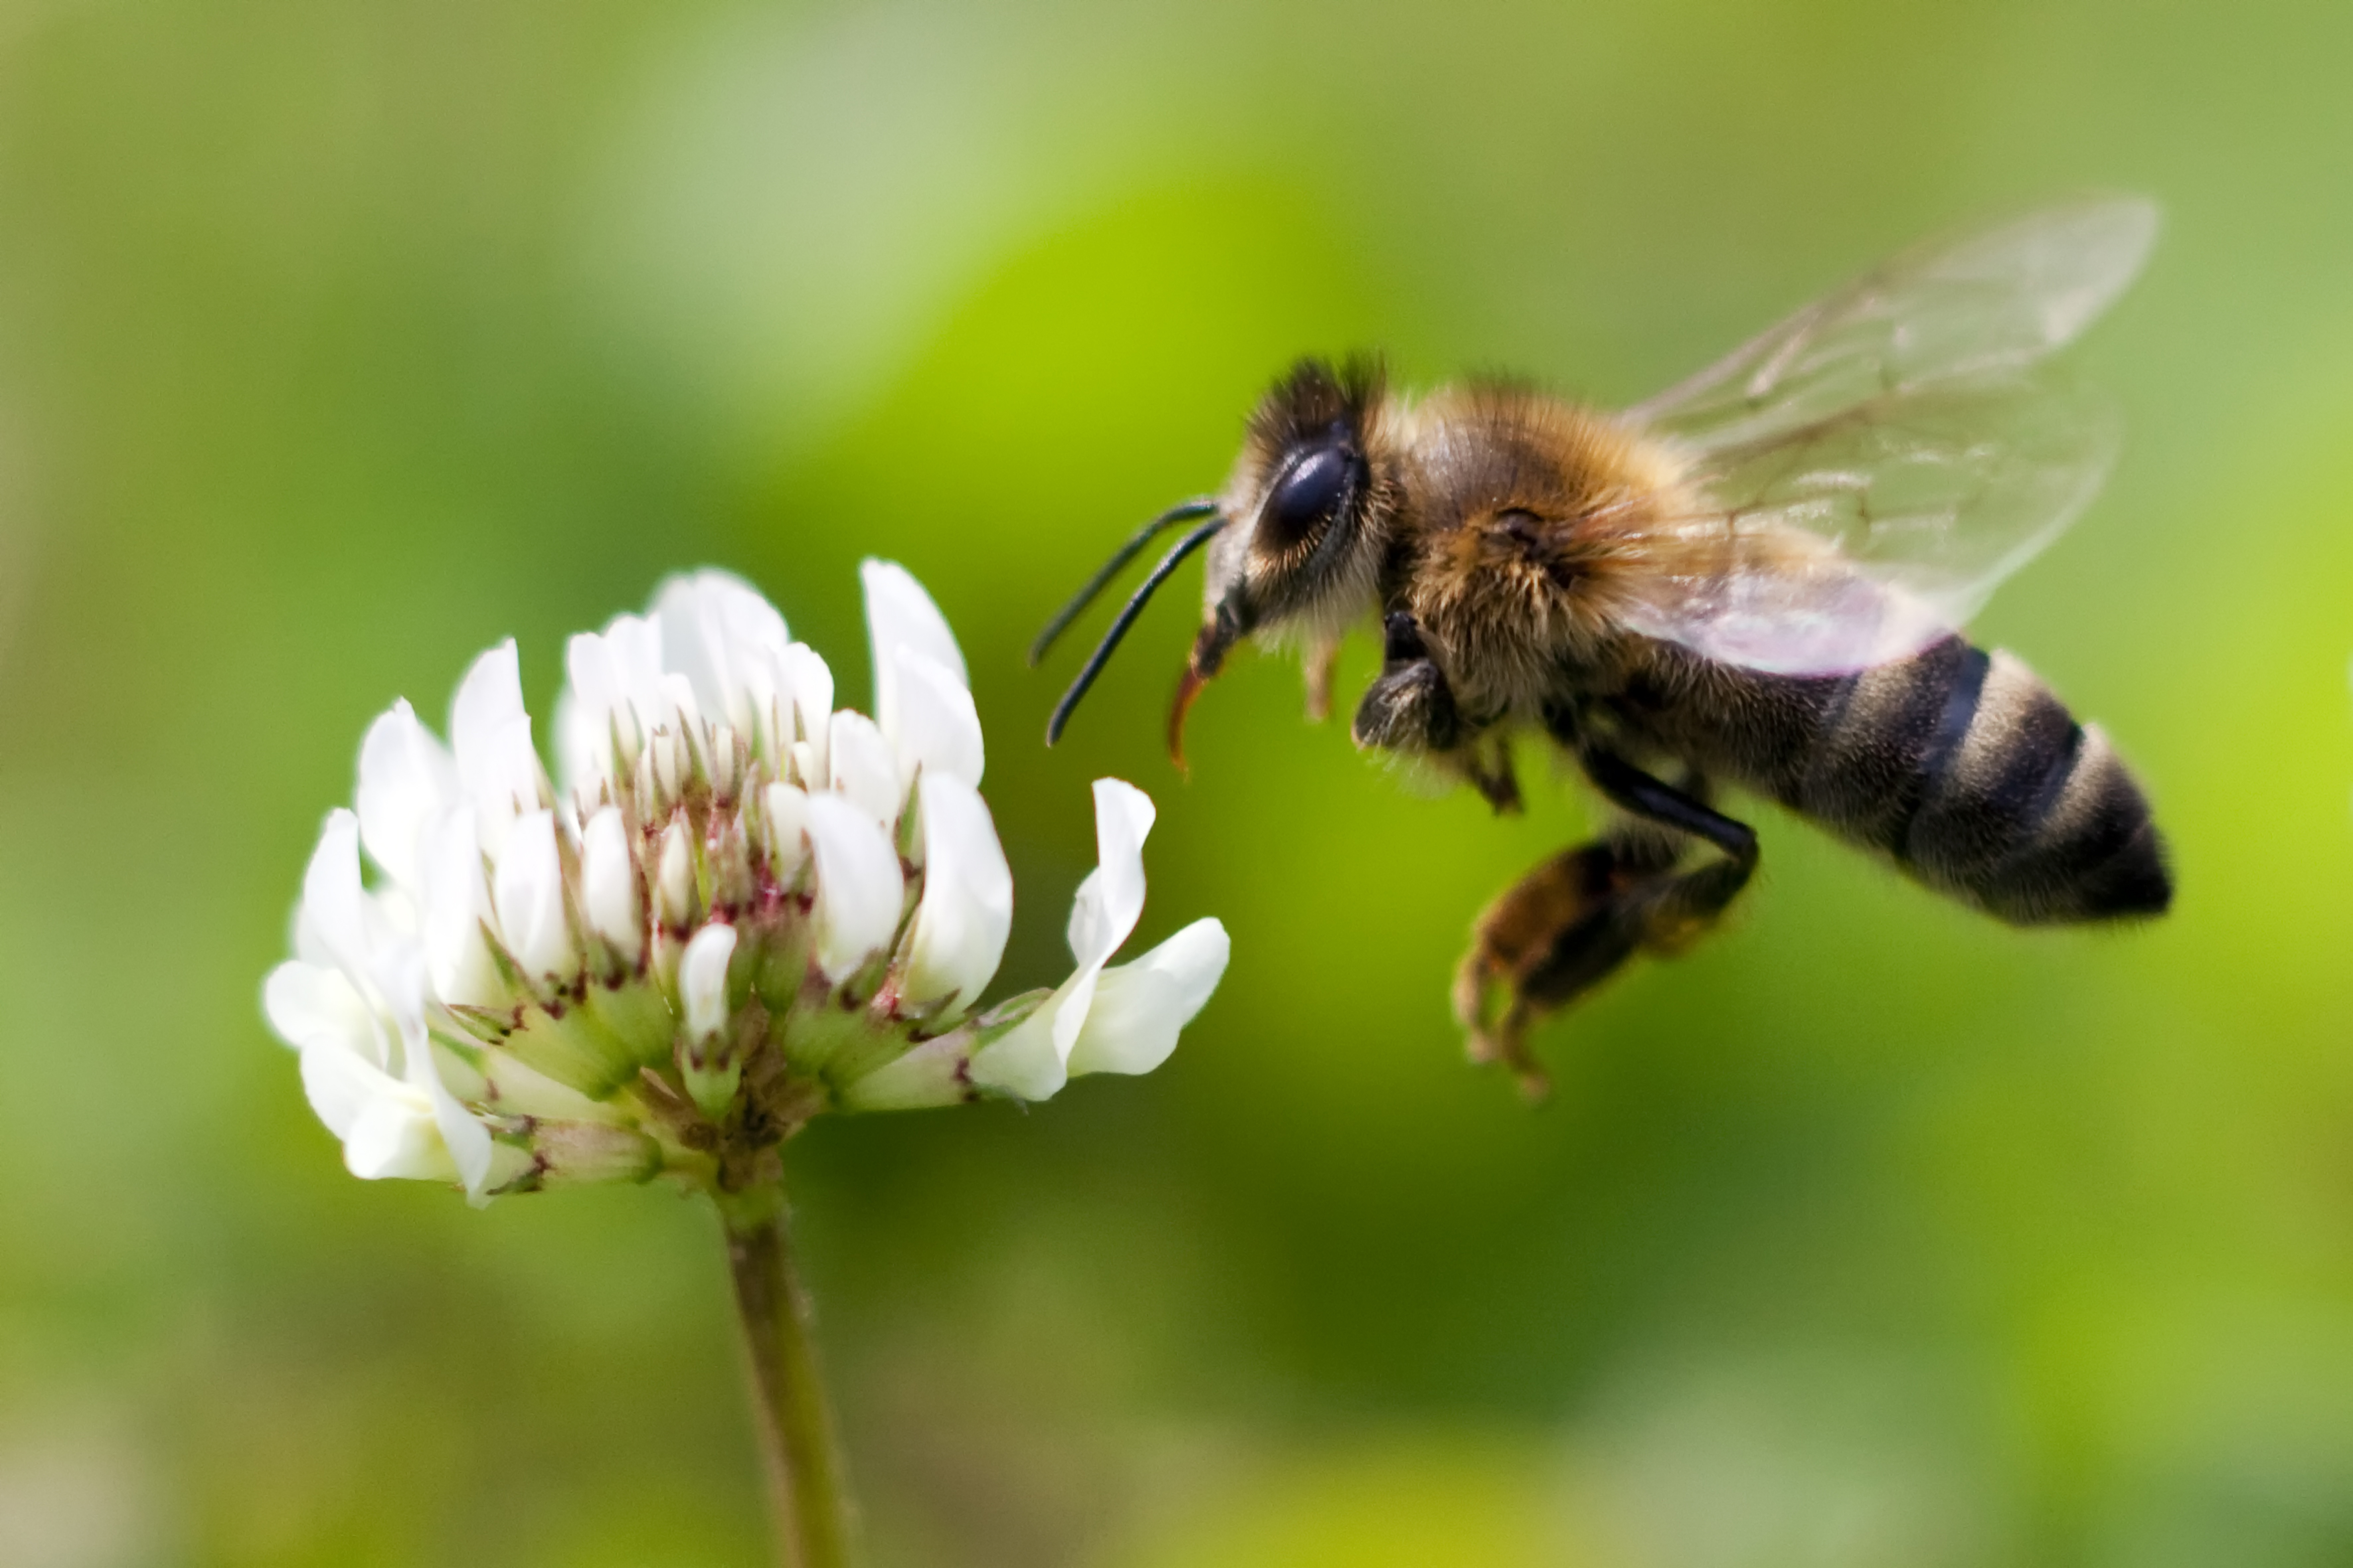 Honey Bees Are Contaminated With Pesticides, Study Says | Time